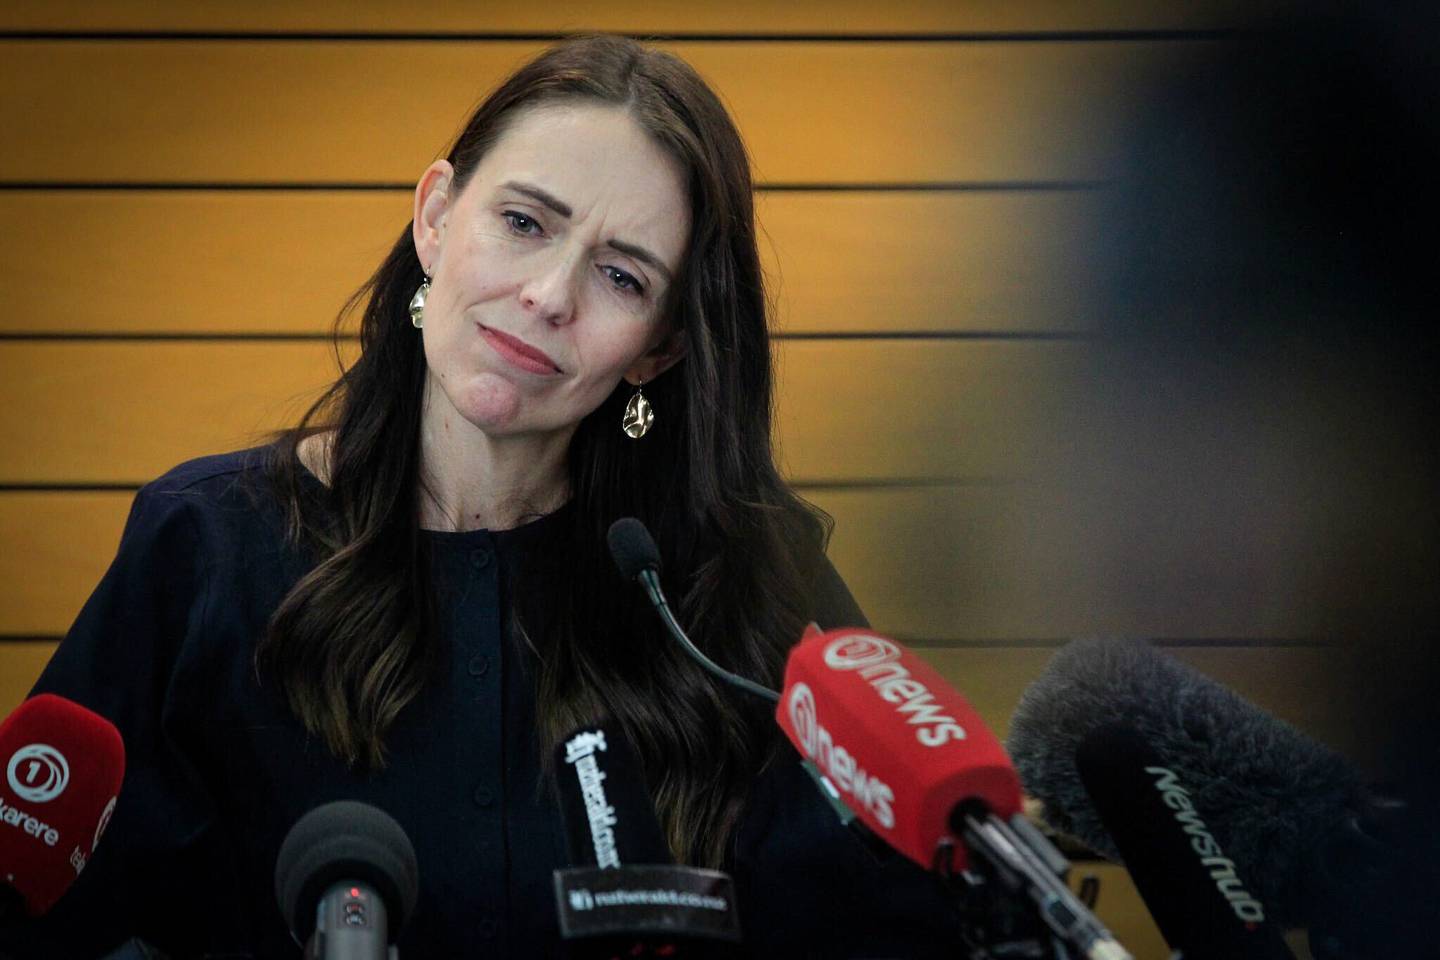 Leaders around the world have responded to Prime Minister Jacinda Ardern's announcement she will stand down on February 7. Photo / Warren Buckland